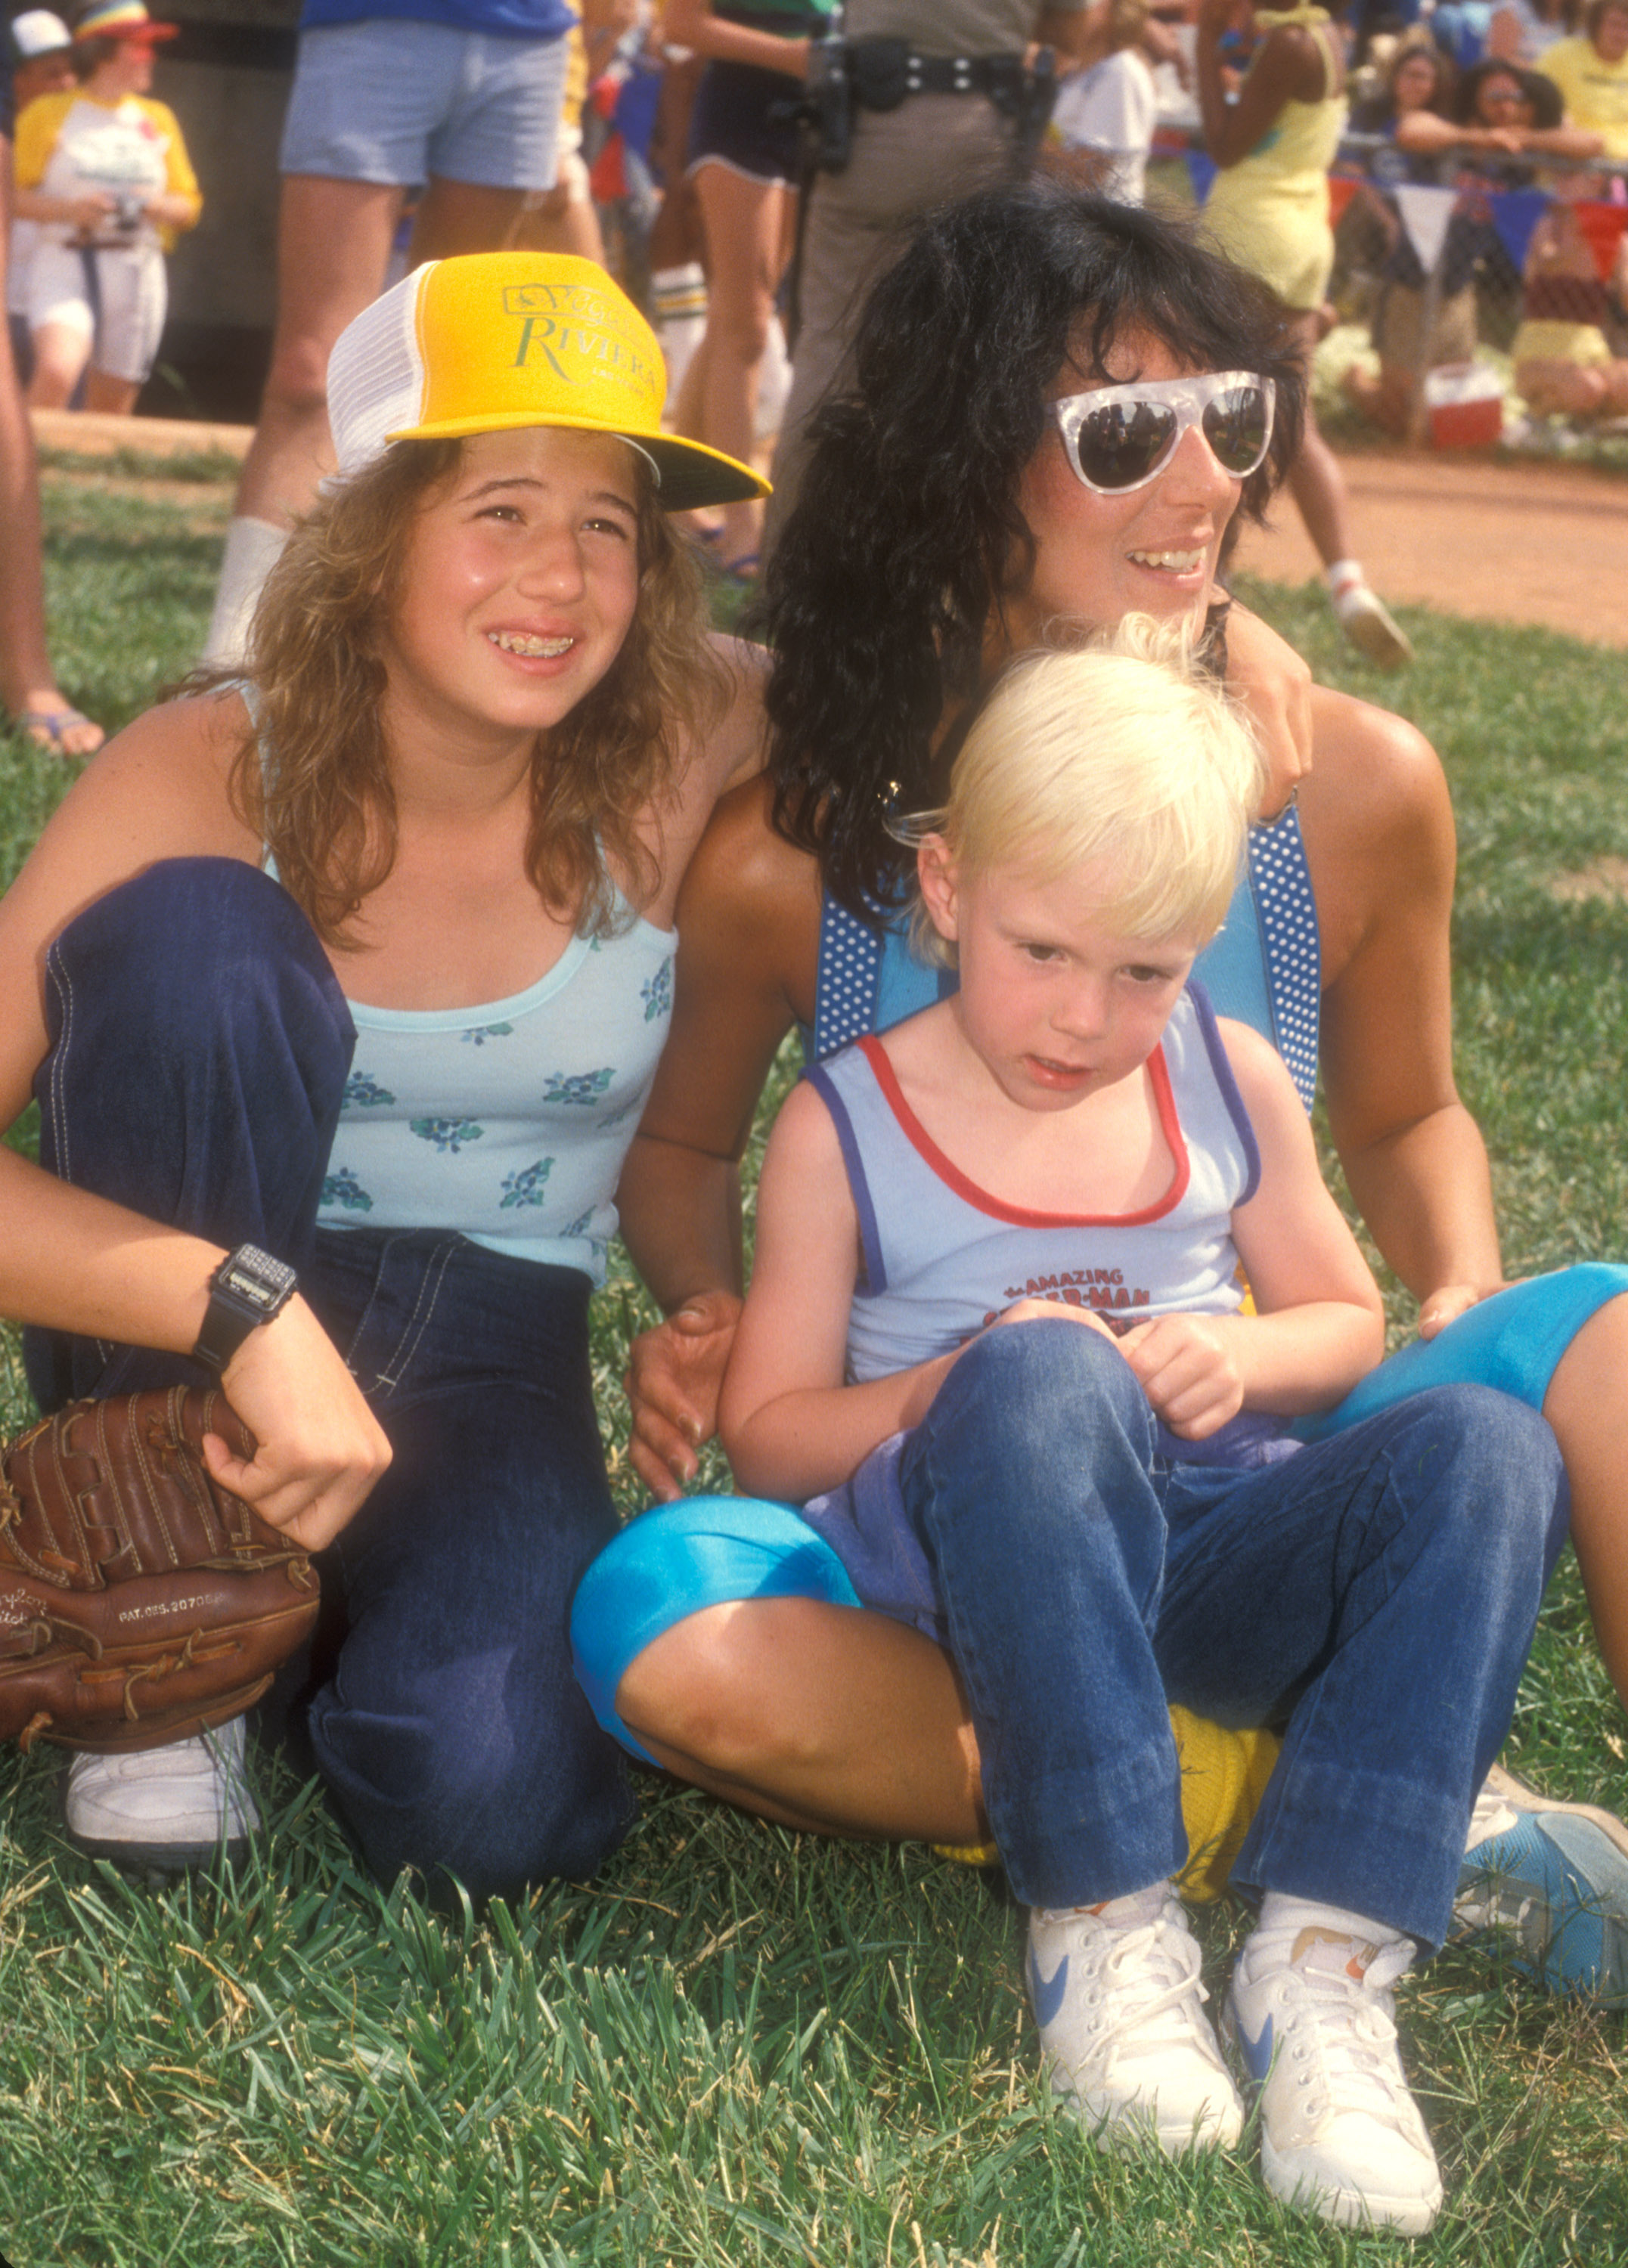 Chastity Bono, Cher, and Elijah Blue Allman at the Riviera 9th annual celebrity softball game, in Las Vegas, Nevada on May 31, 1981. | Source: Getty Images